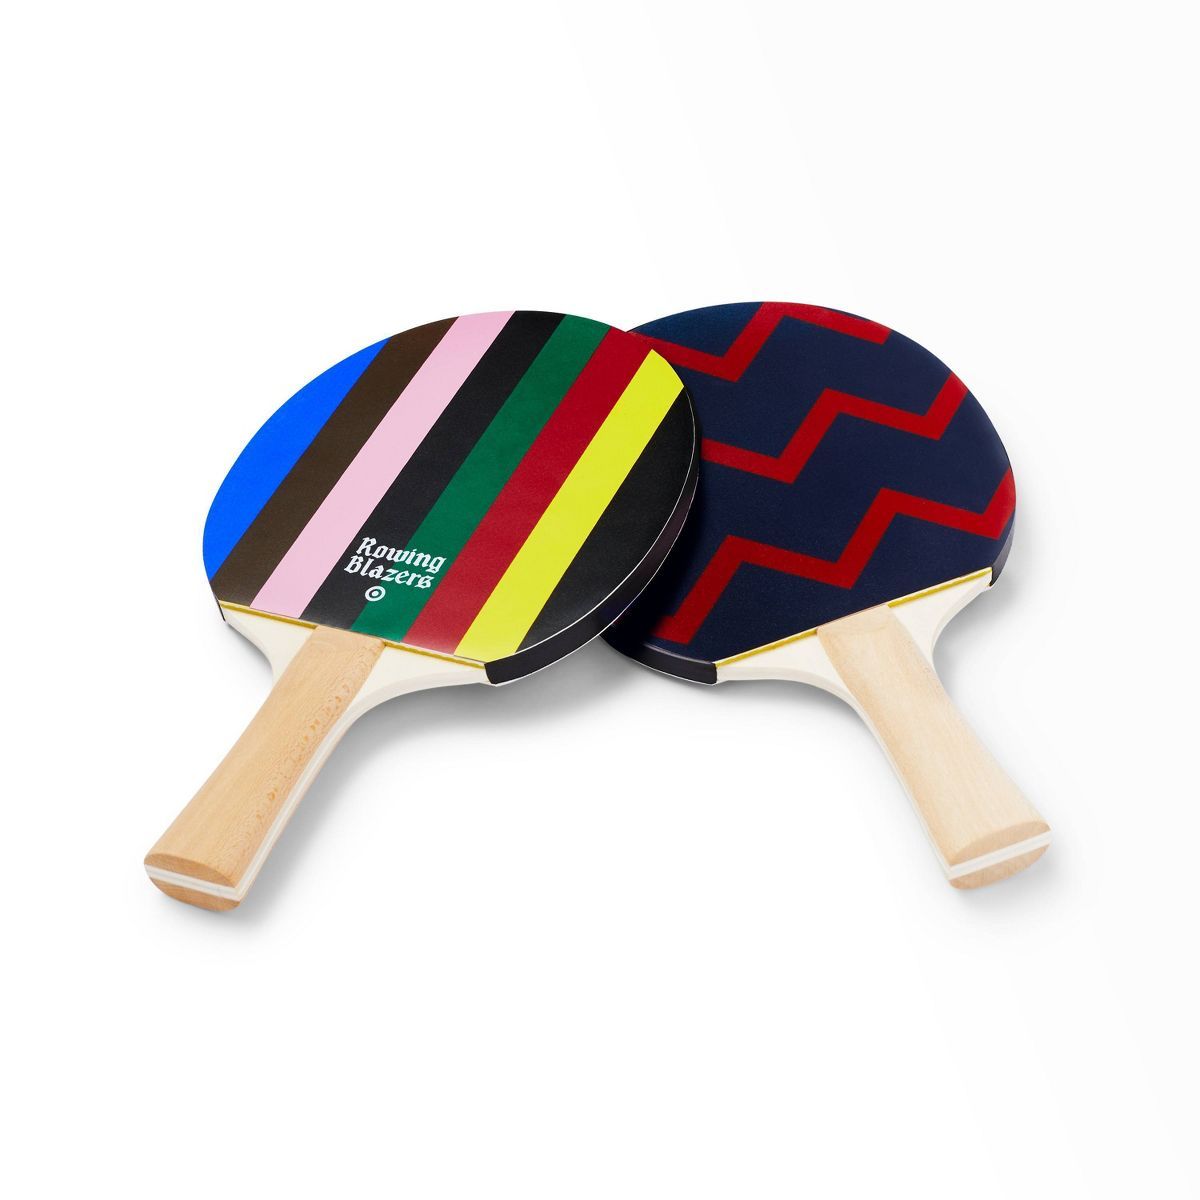 Croquet Stripe and Zig Zag Ping Pong Paddle Set - Rowing Blazers x Target | Target